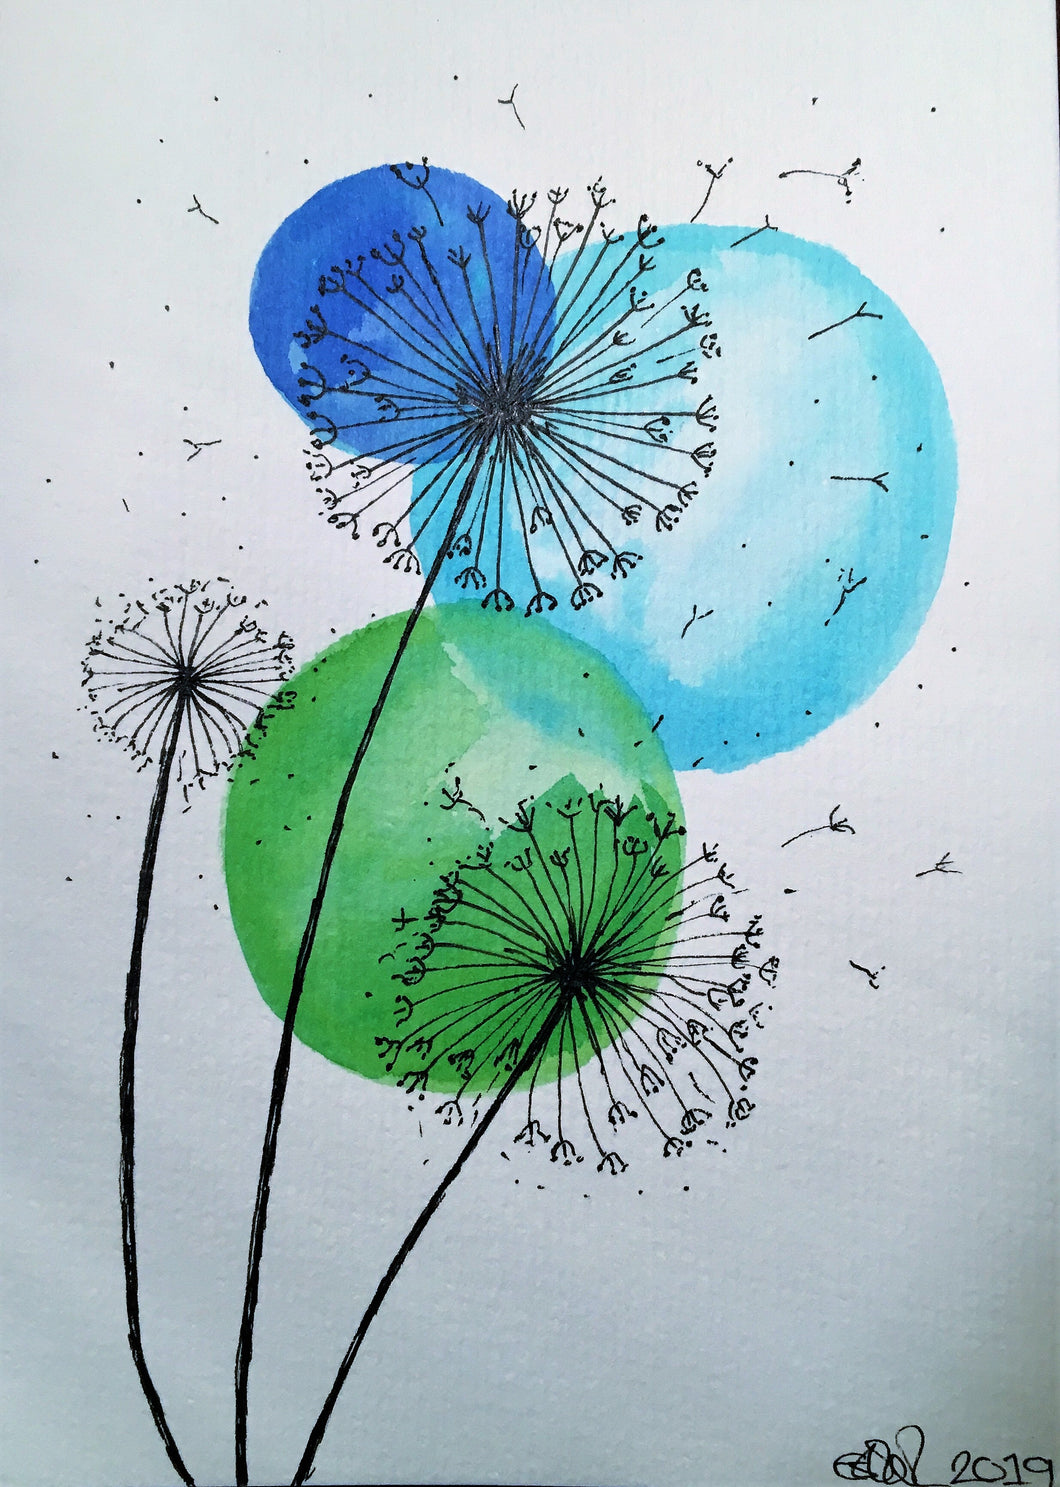 Handpainted Watercolour Greeting Card - Abstract Blue/Green Circles with Dandelions - eDgE dEsiGn London